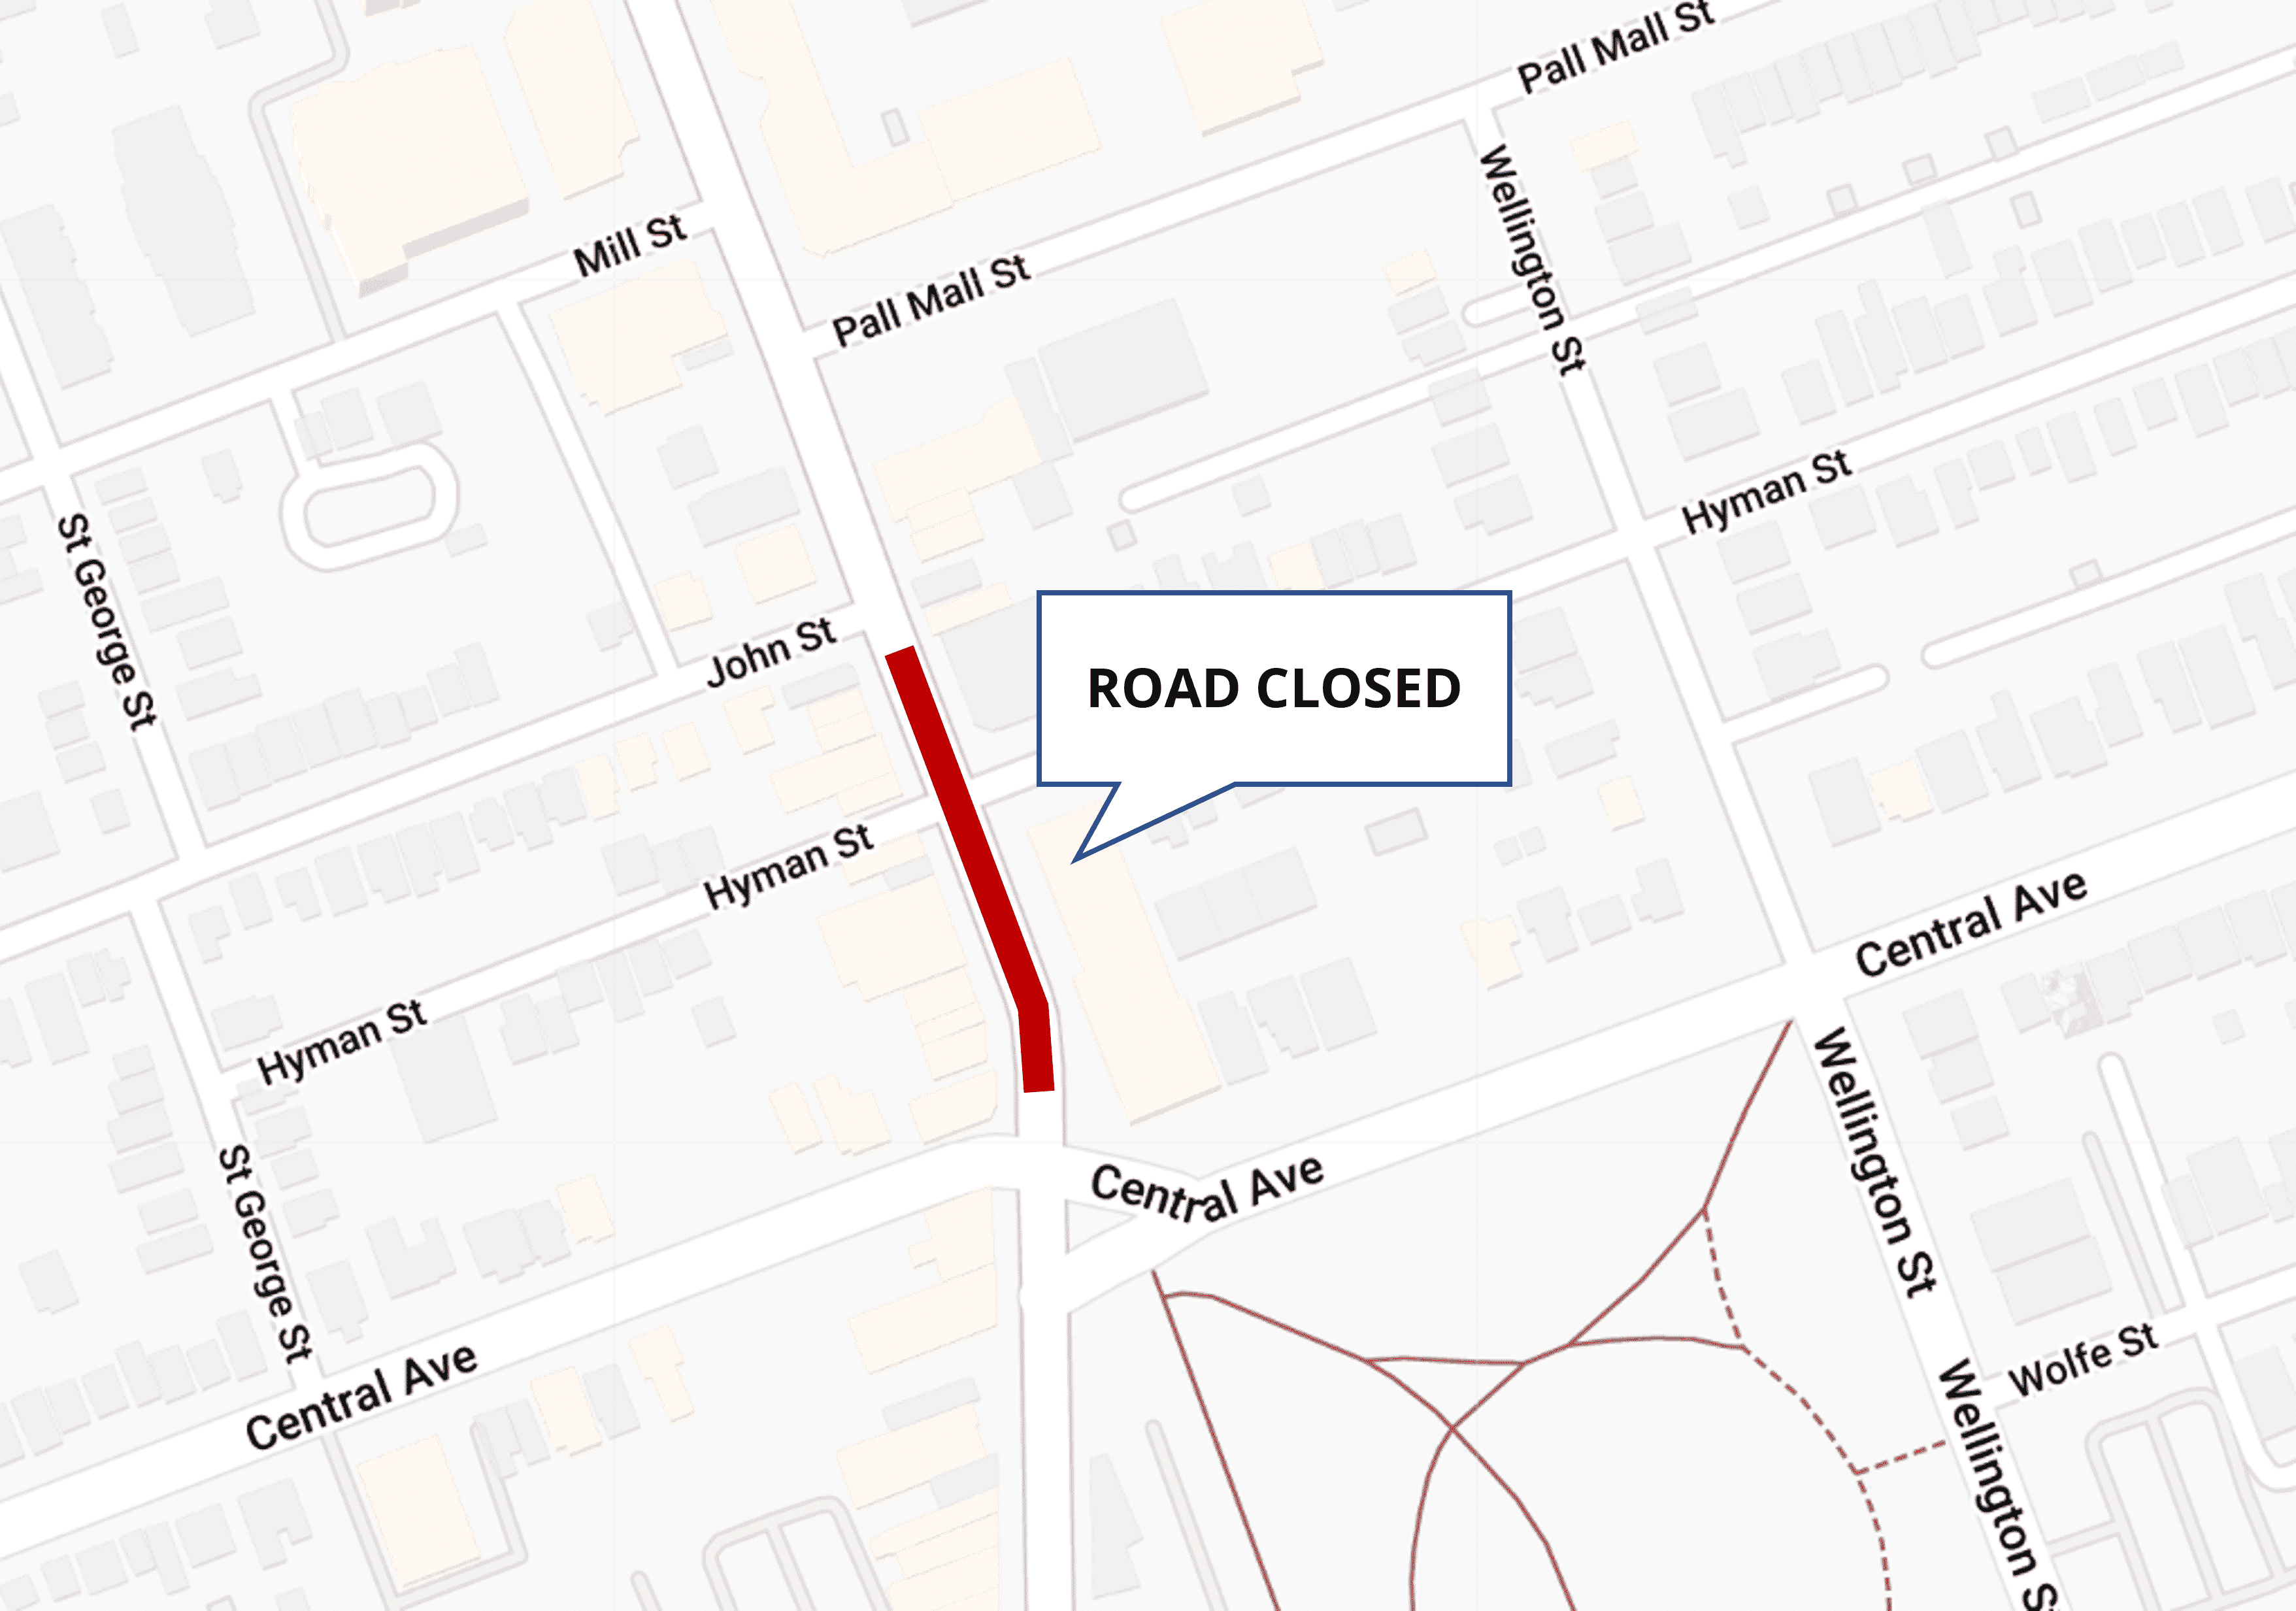 Map of Richmond Street Road Closure (Central Ave to John St)